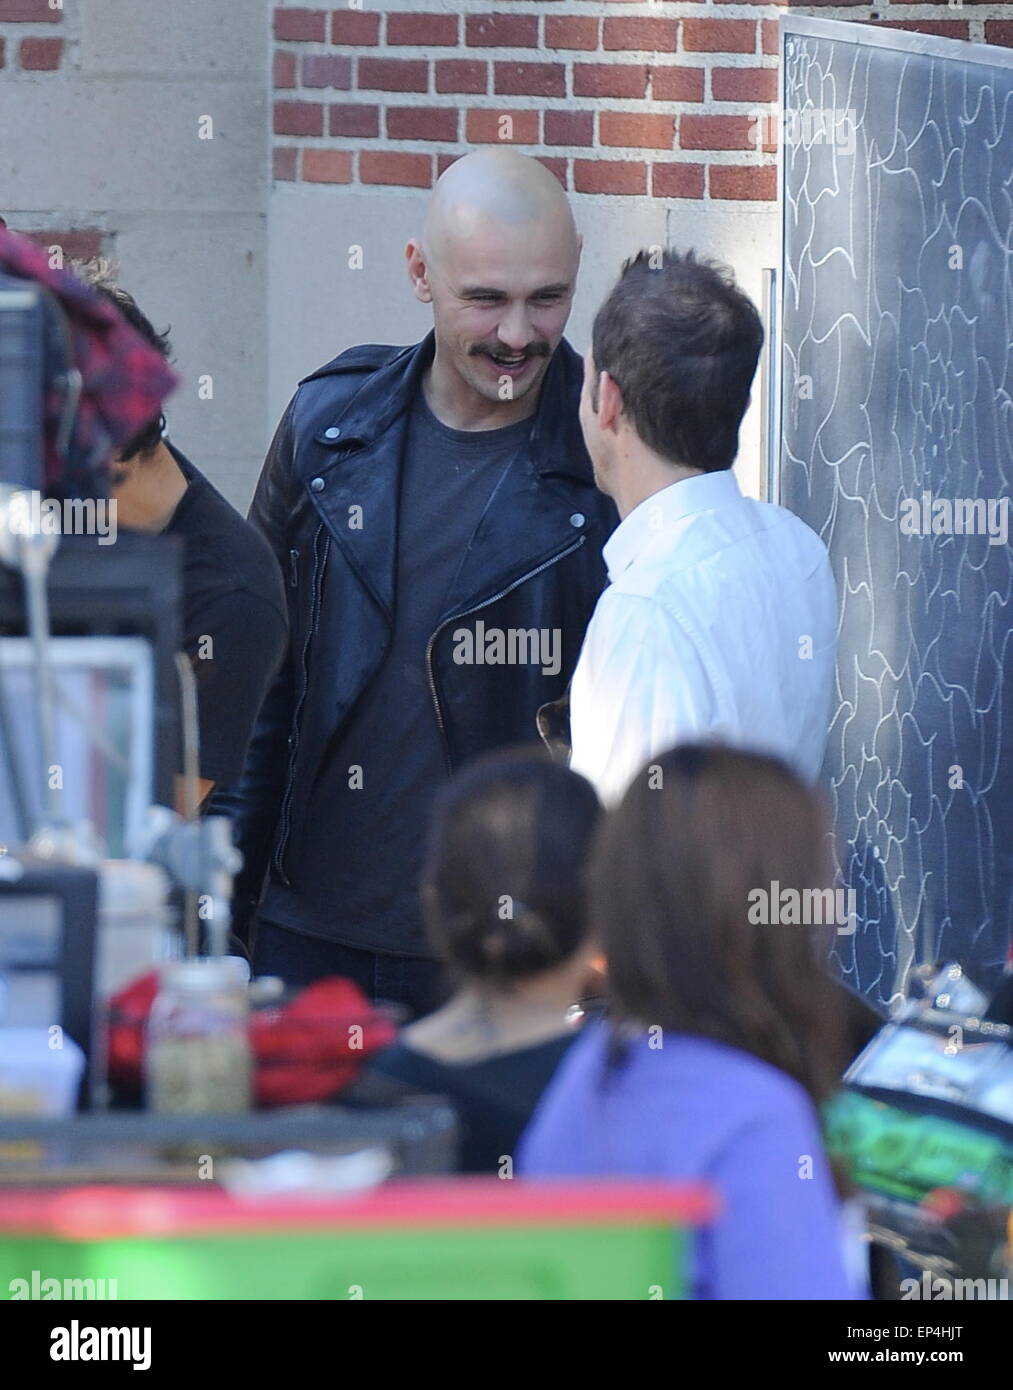 James Franco spotted chatting it up with college students at USC campus during break on the set of 'Zeroville' filming in Los Angeles. The actor was also seen wearing a cast on his hands.  Featuring: James Franco Where: Los Angeles, California, United States When: 09 Nov 2014 Credit: Cousart/JFXimages/WENN.com Stock Photo